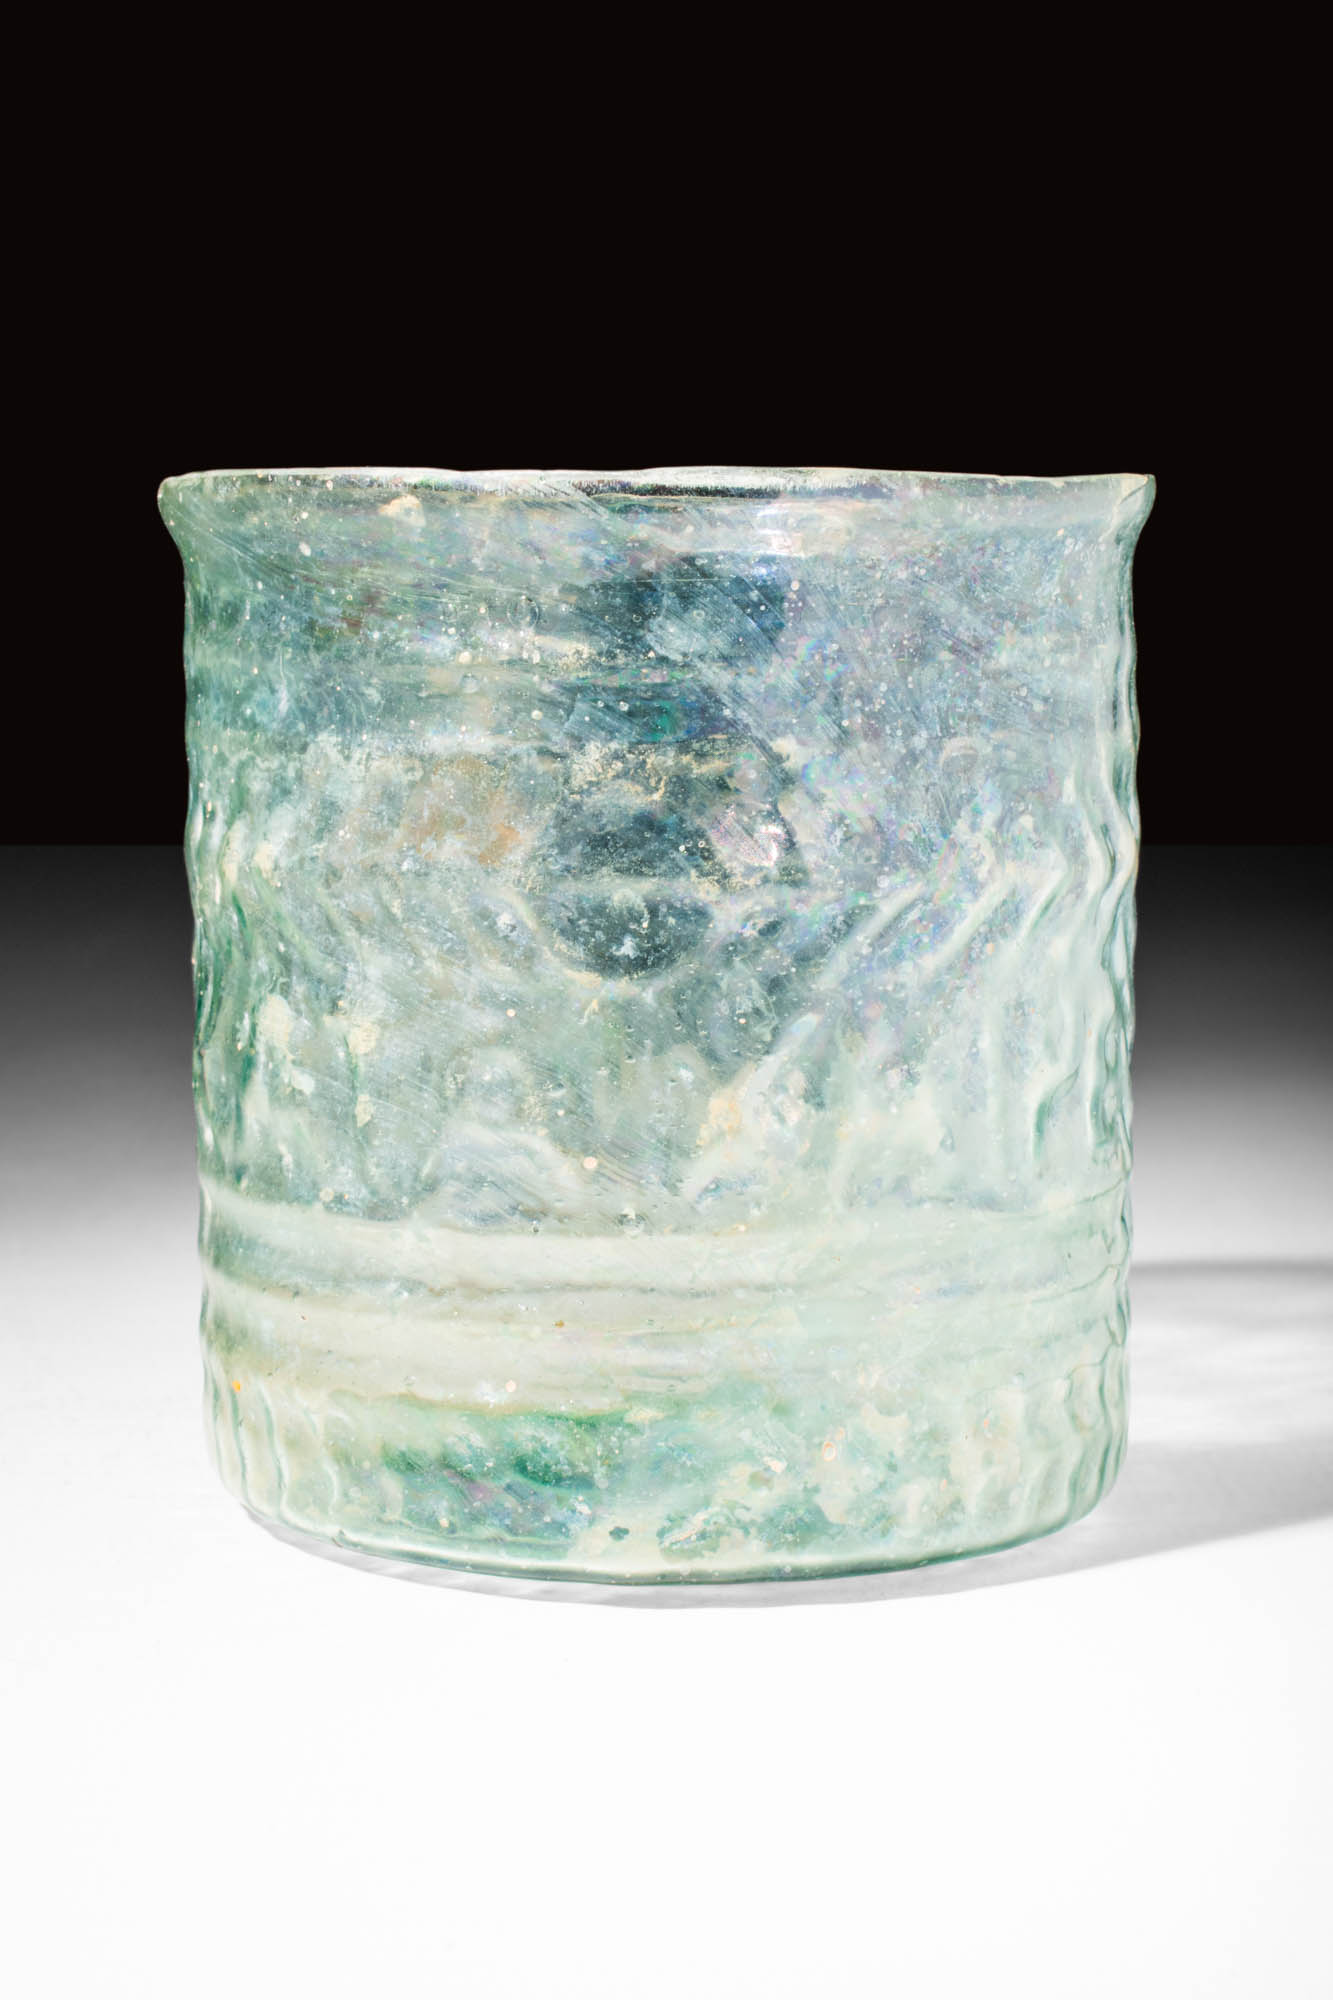 BYZANTINE GLASS CUP DECORATED WITH INSCRIPTION - Image 2 of 5